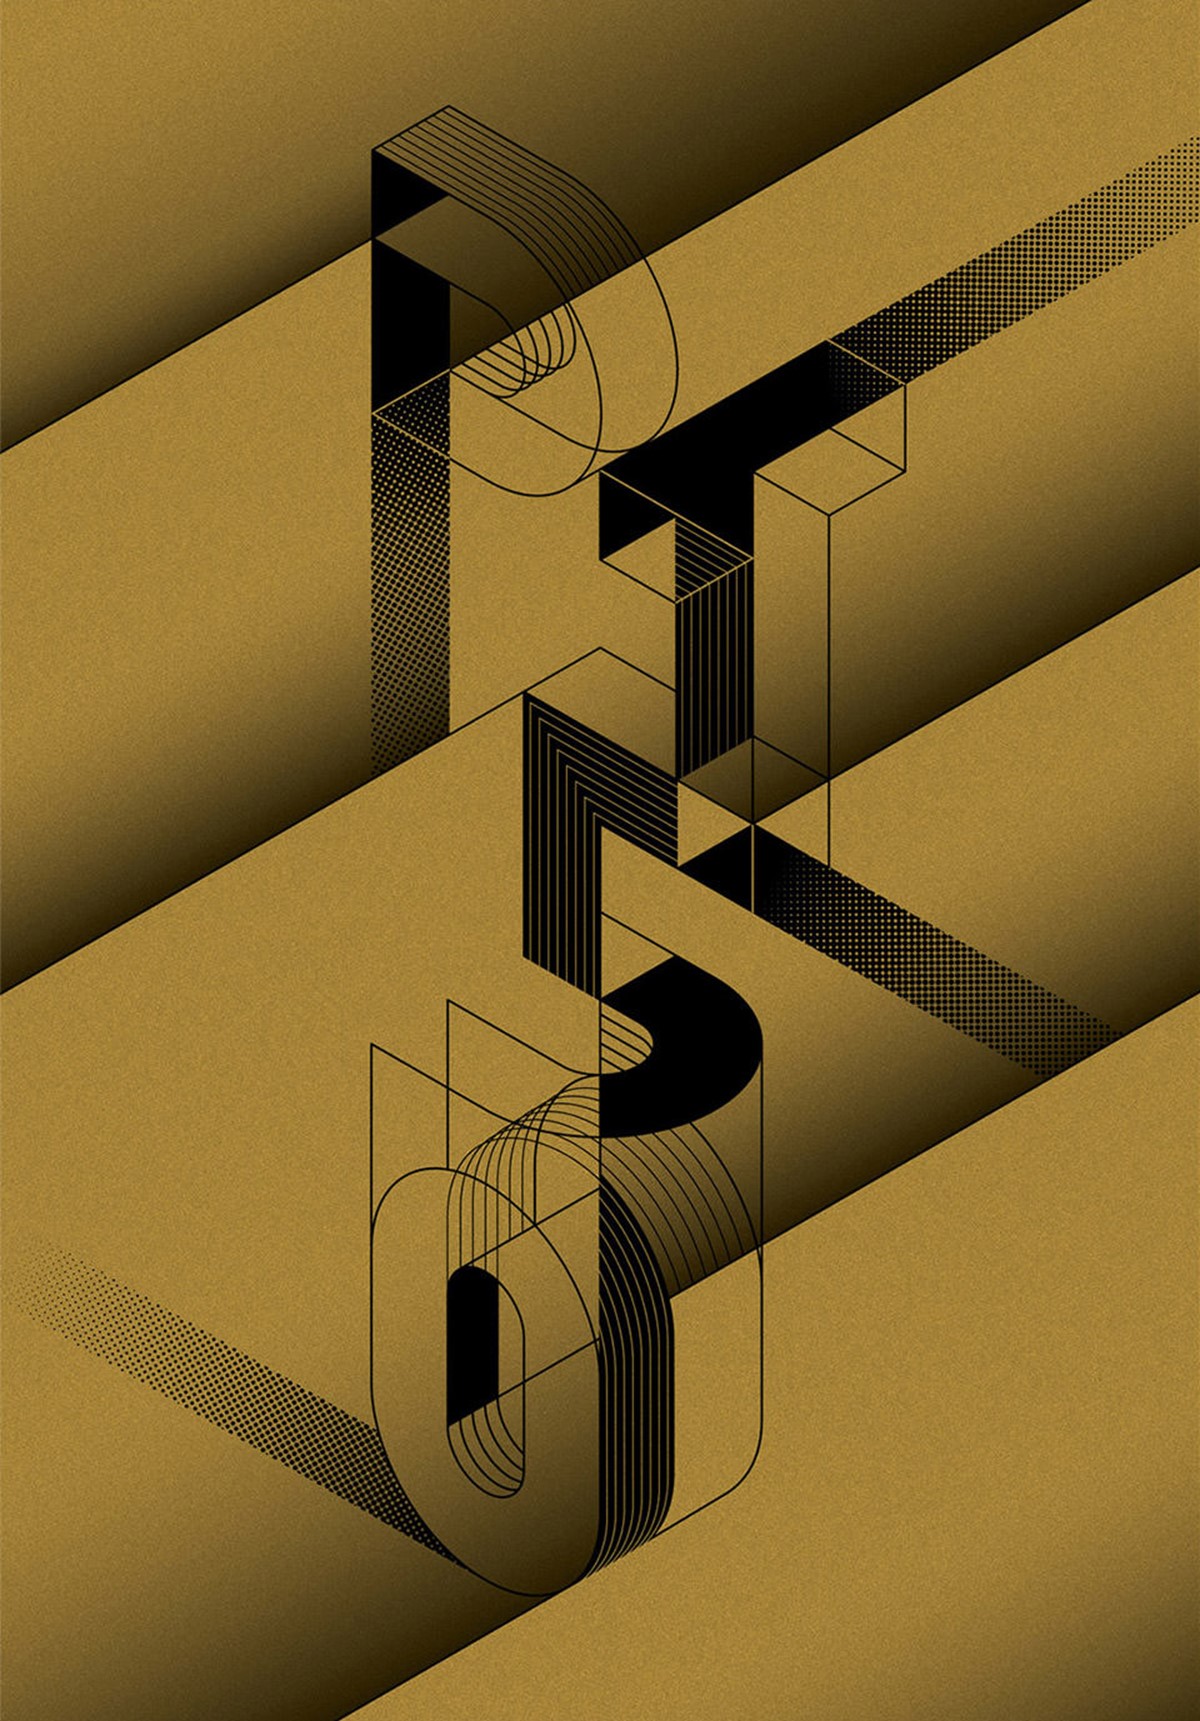 Psychology Today Magazine. Experimental bespoke typography on gold. Design by Superfried.